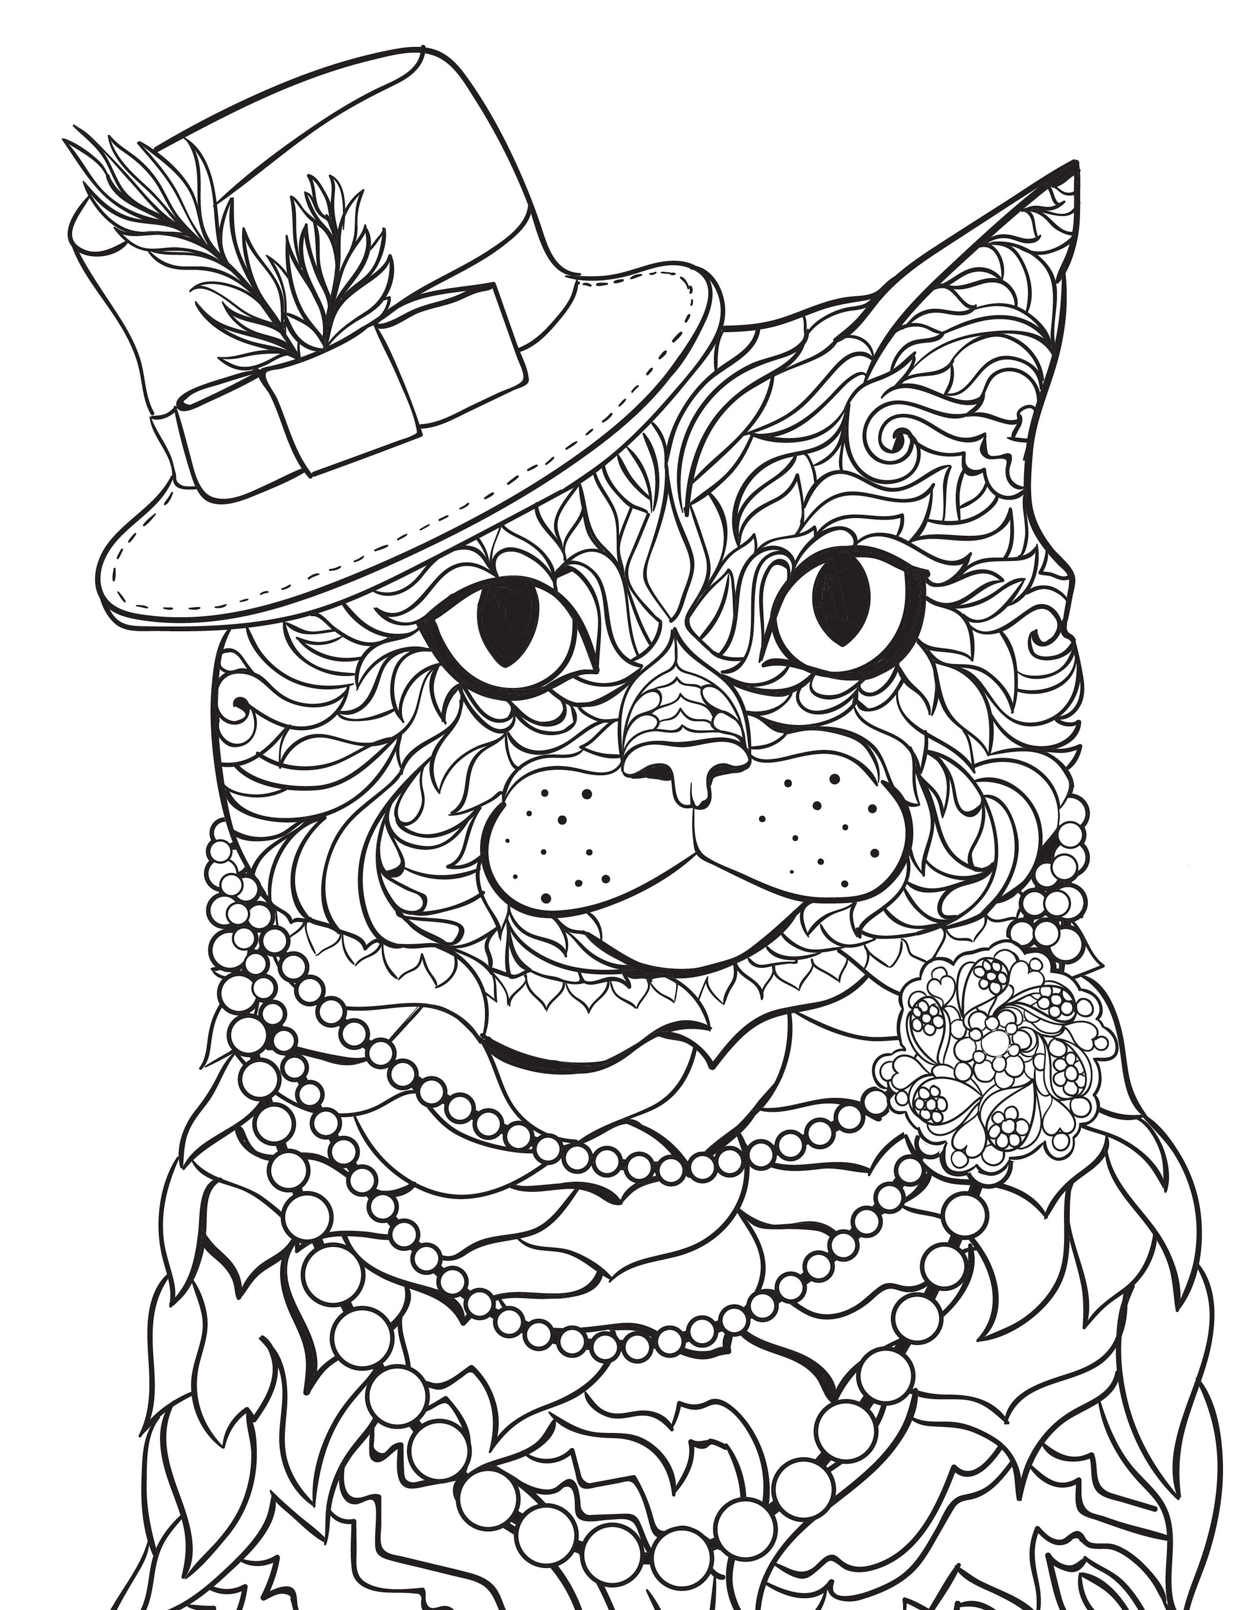 Easy Cat Coloring Pages for Adults Printable